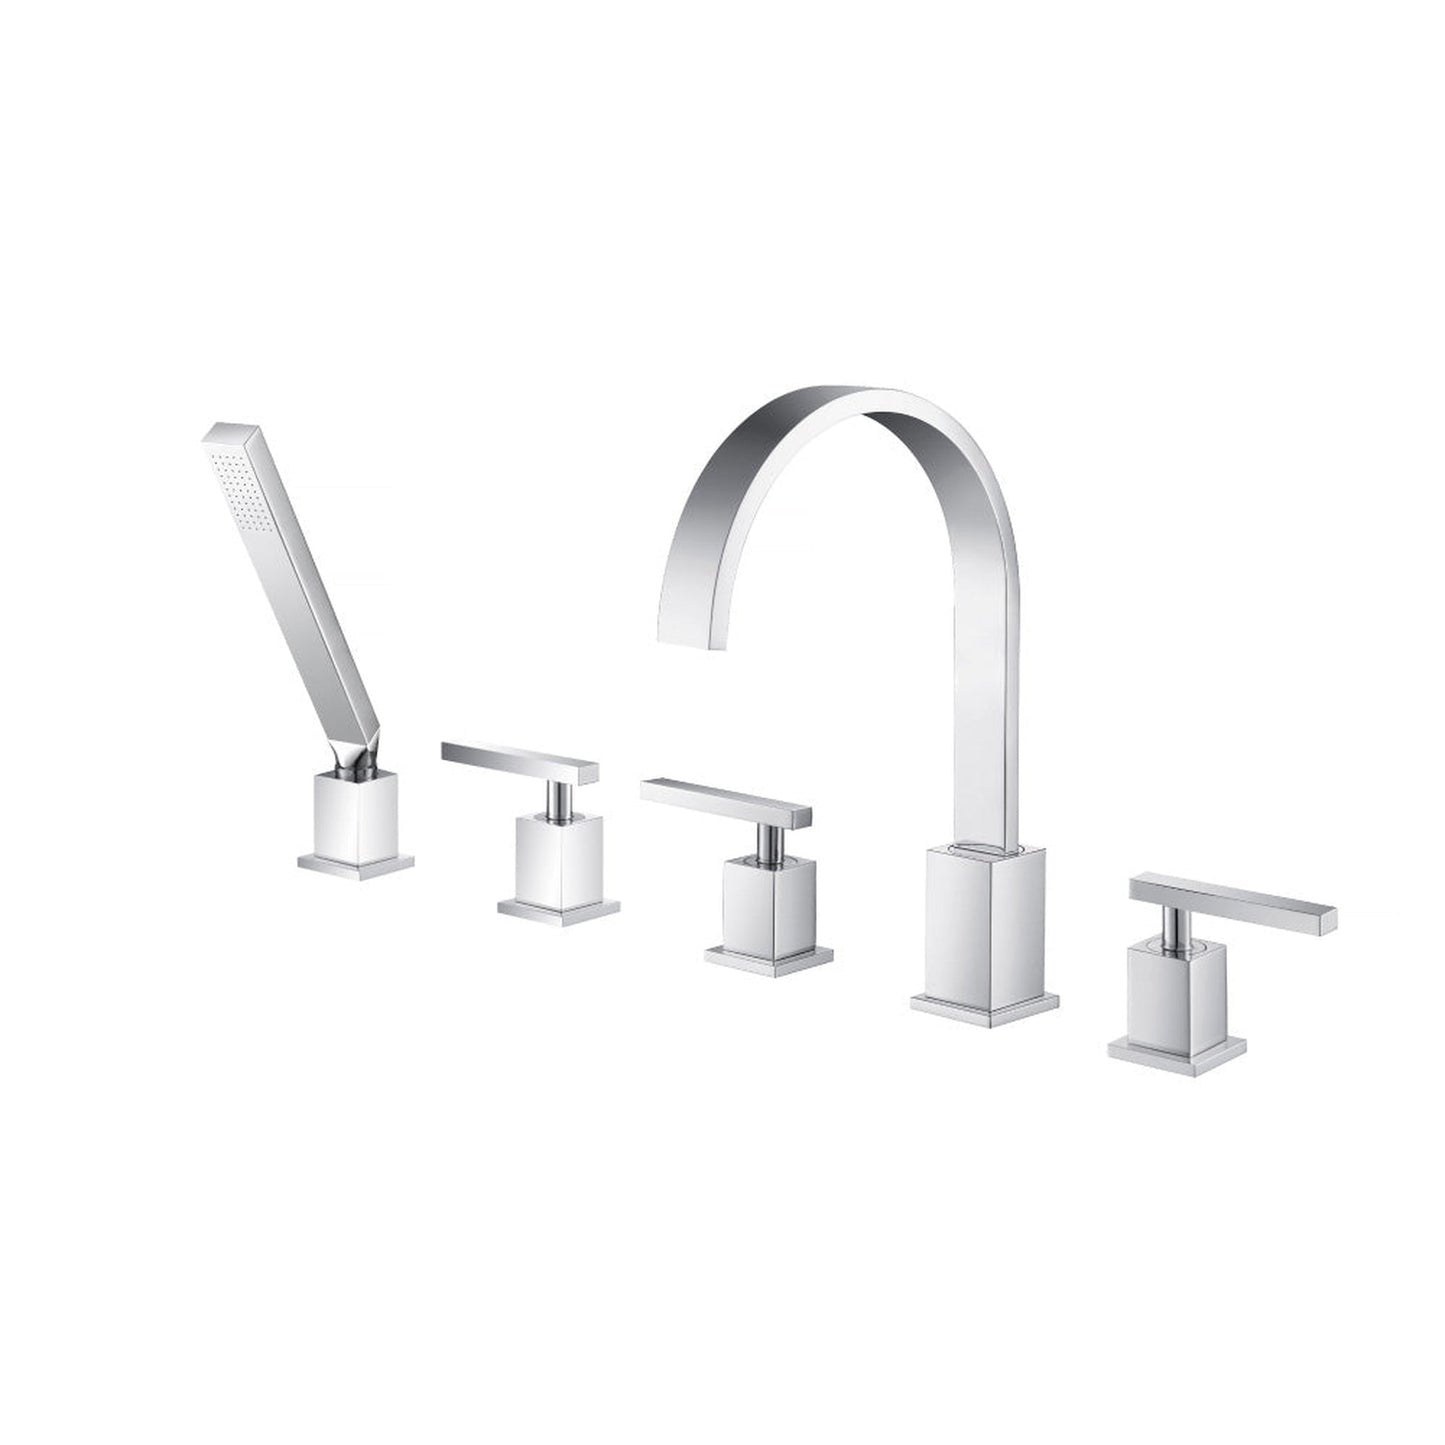 Isenberg Serie 150 Five Hole Deck Mounted Roman Tub Faucet With Hand Shower in Chrome